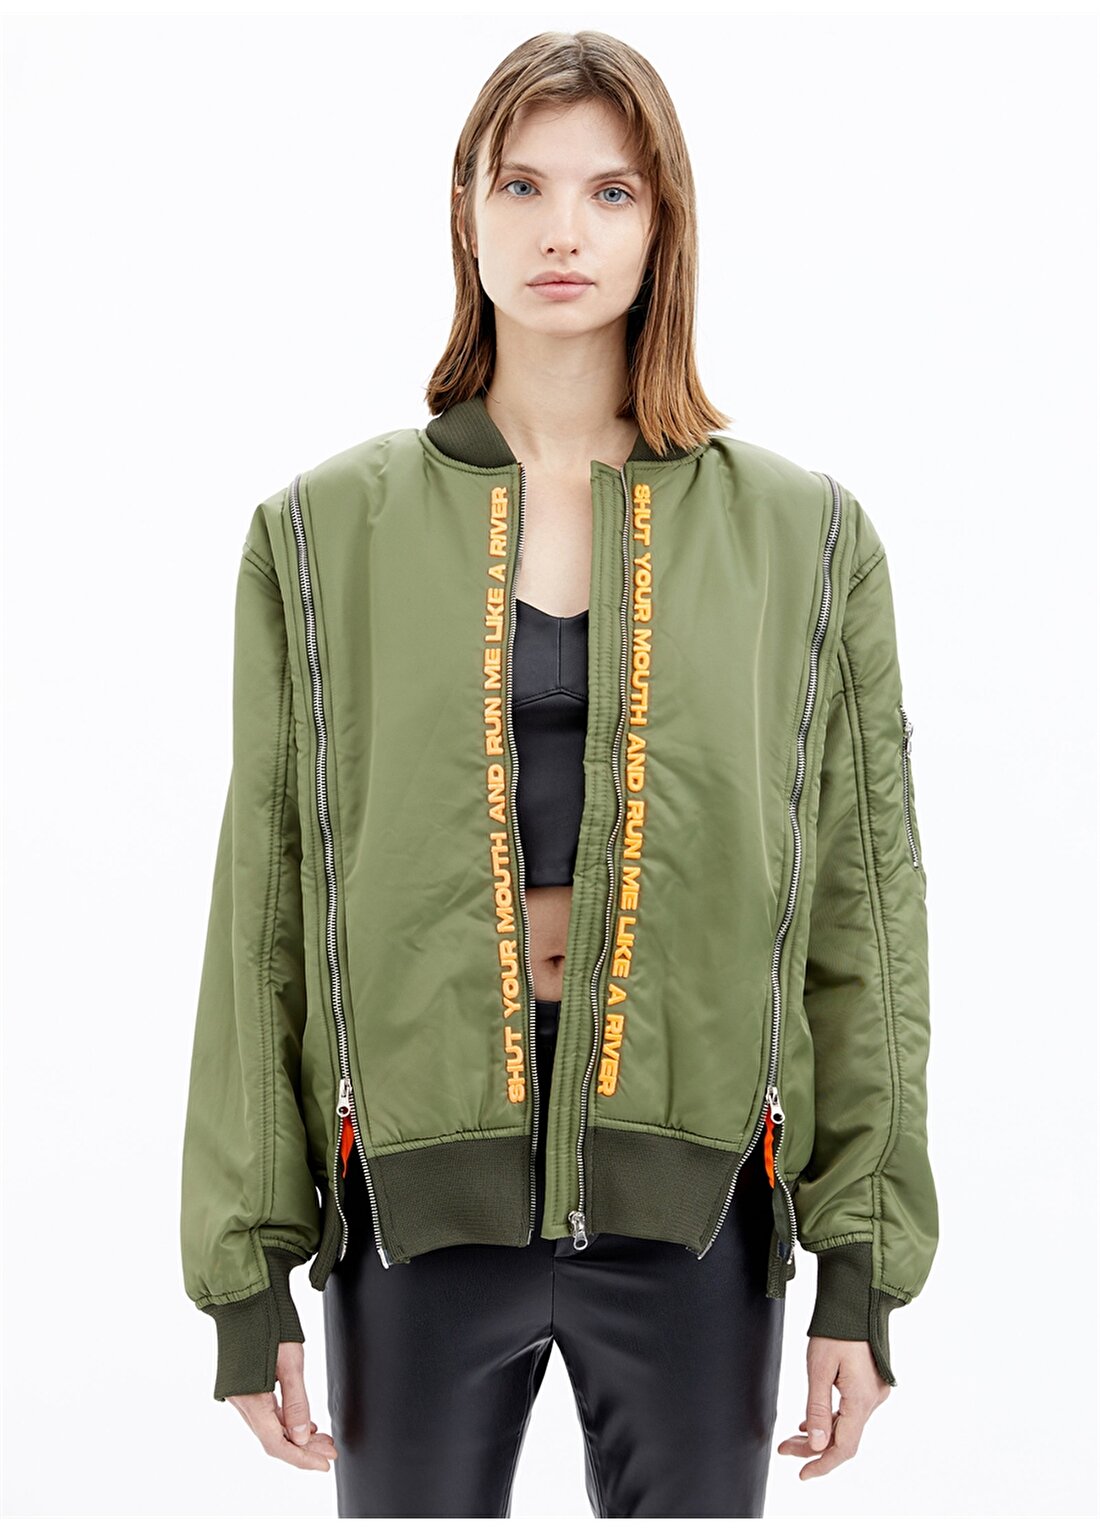 Befour Out River Unisex Bomber